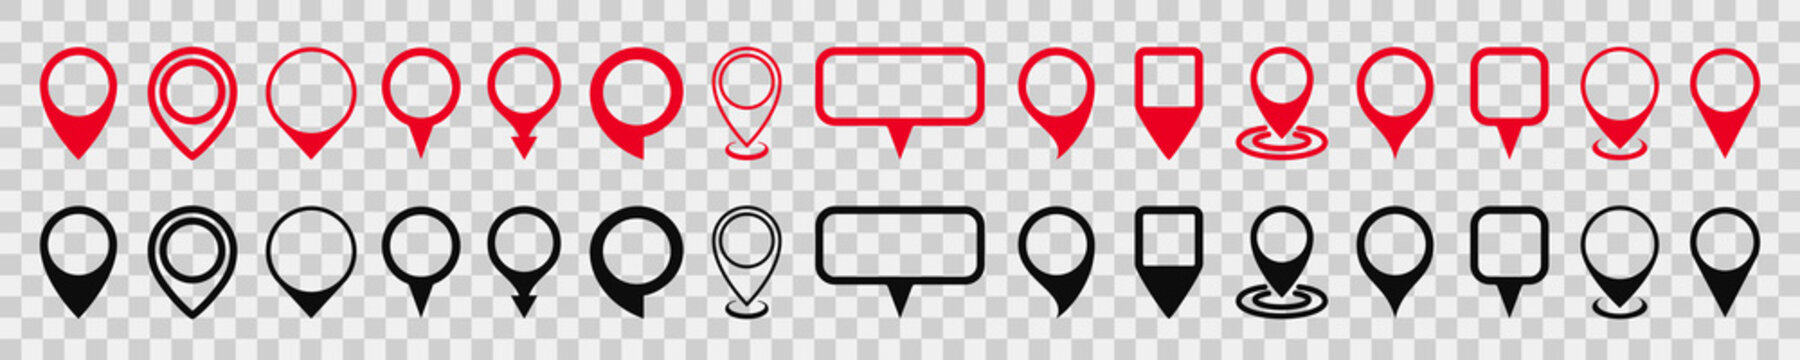 Set red and black pin map marker pointer icon on transparent background, GPS location flat symbol – stock vector